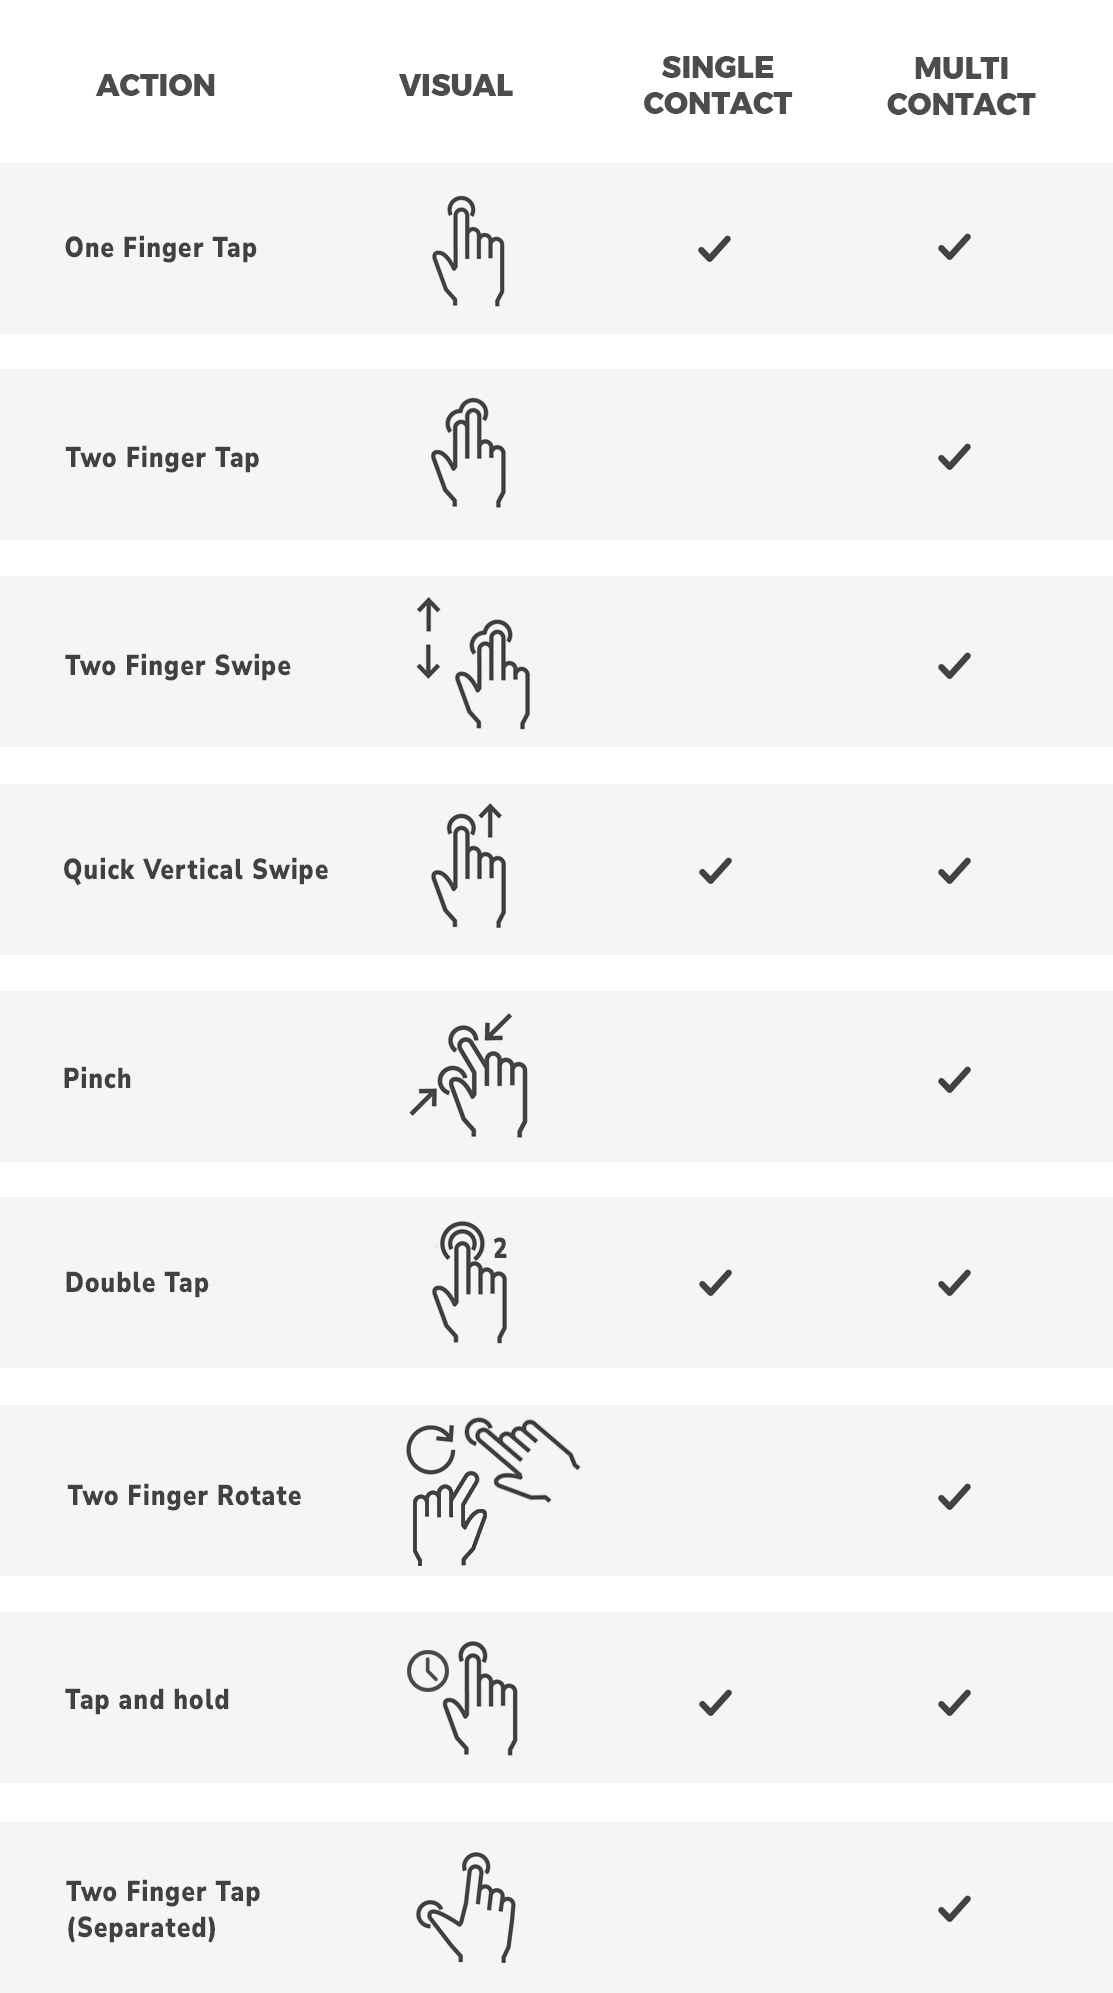 Seen done accepted checked double - User Interface & Gesture Icons